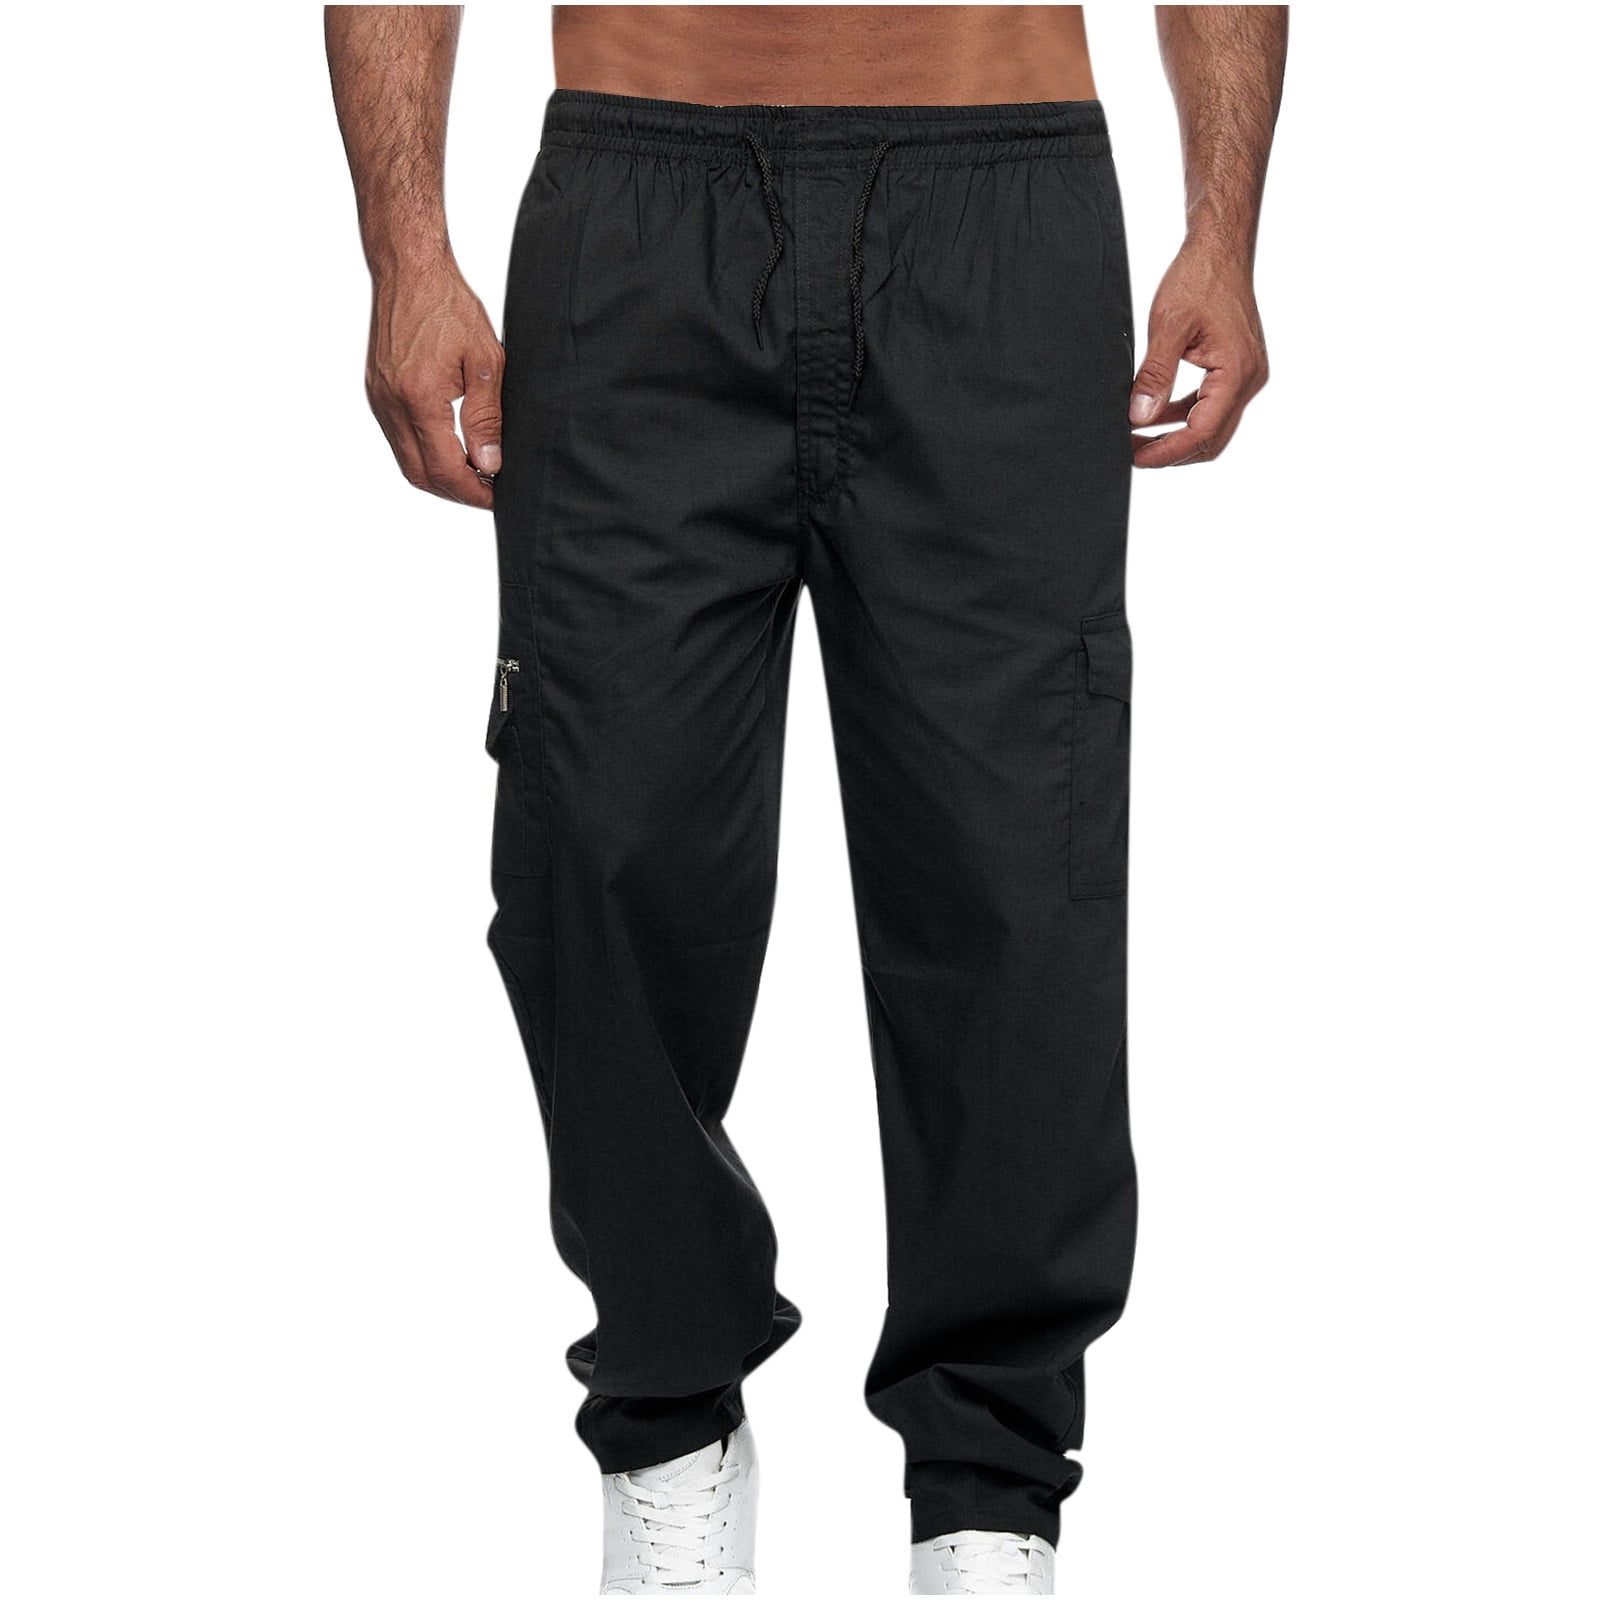 Solid Overall Pants for Men Casual Multi Pockets Cargo Pants Baggy ...